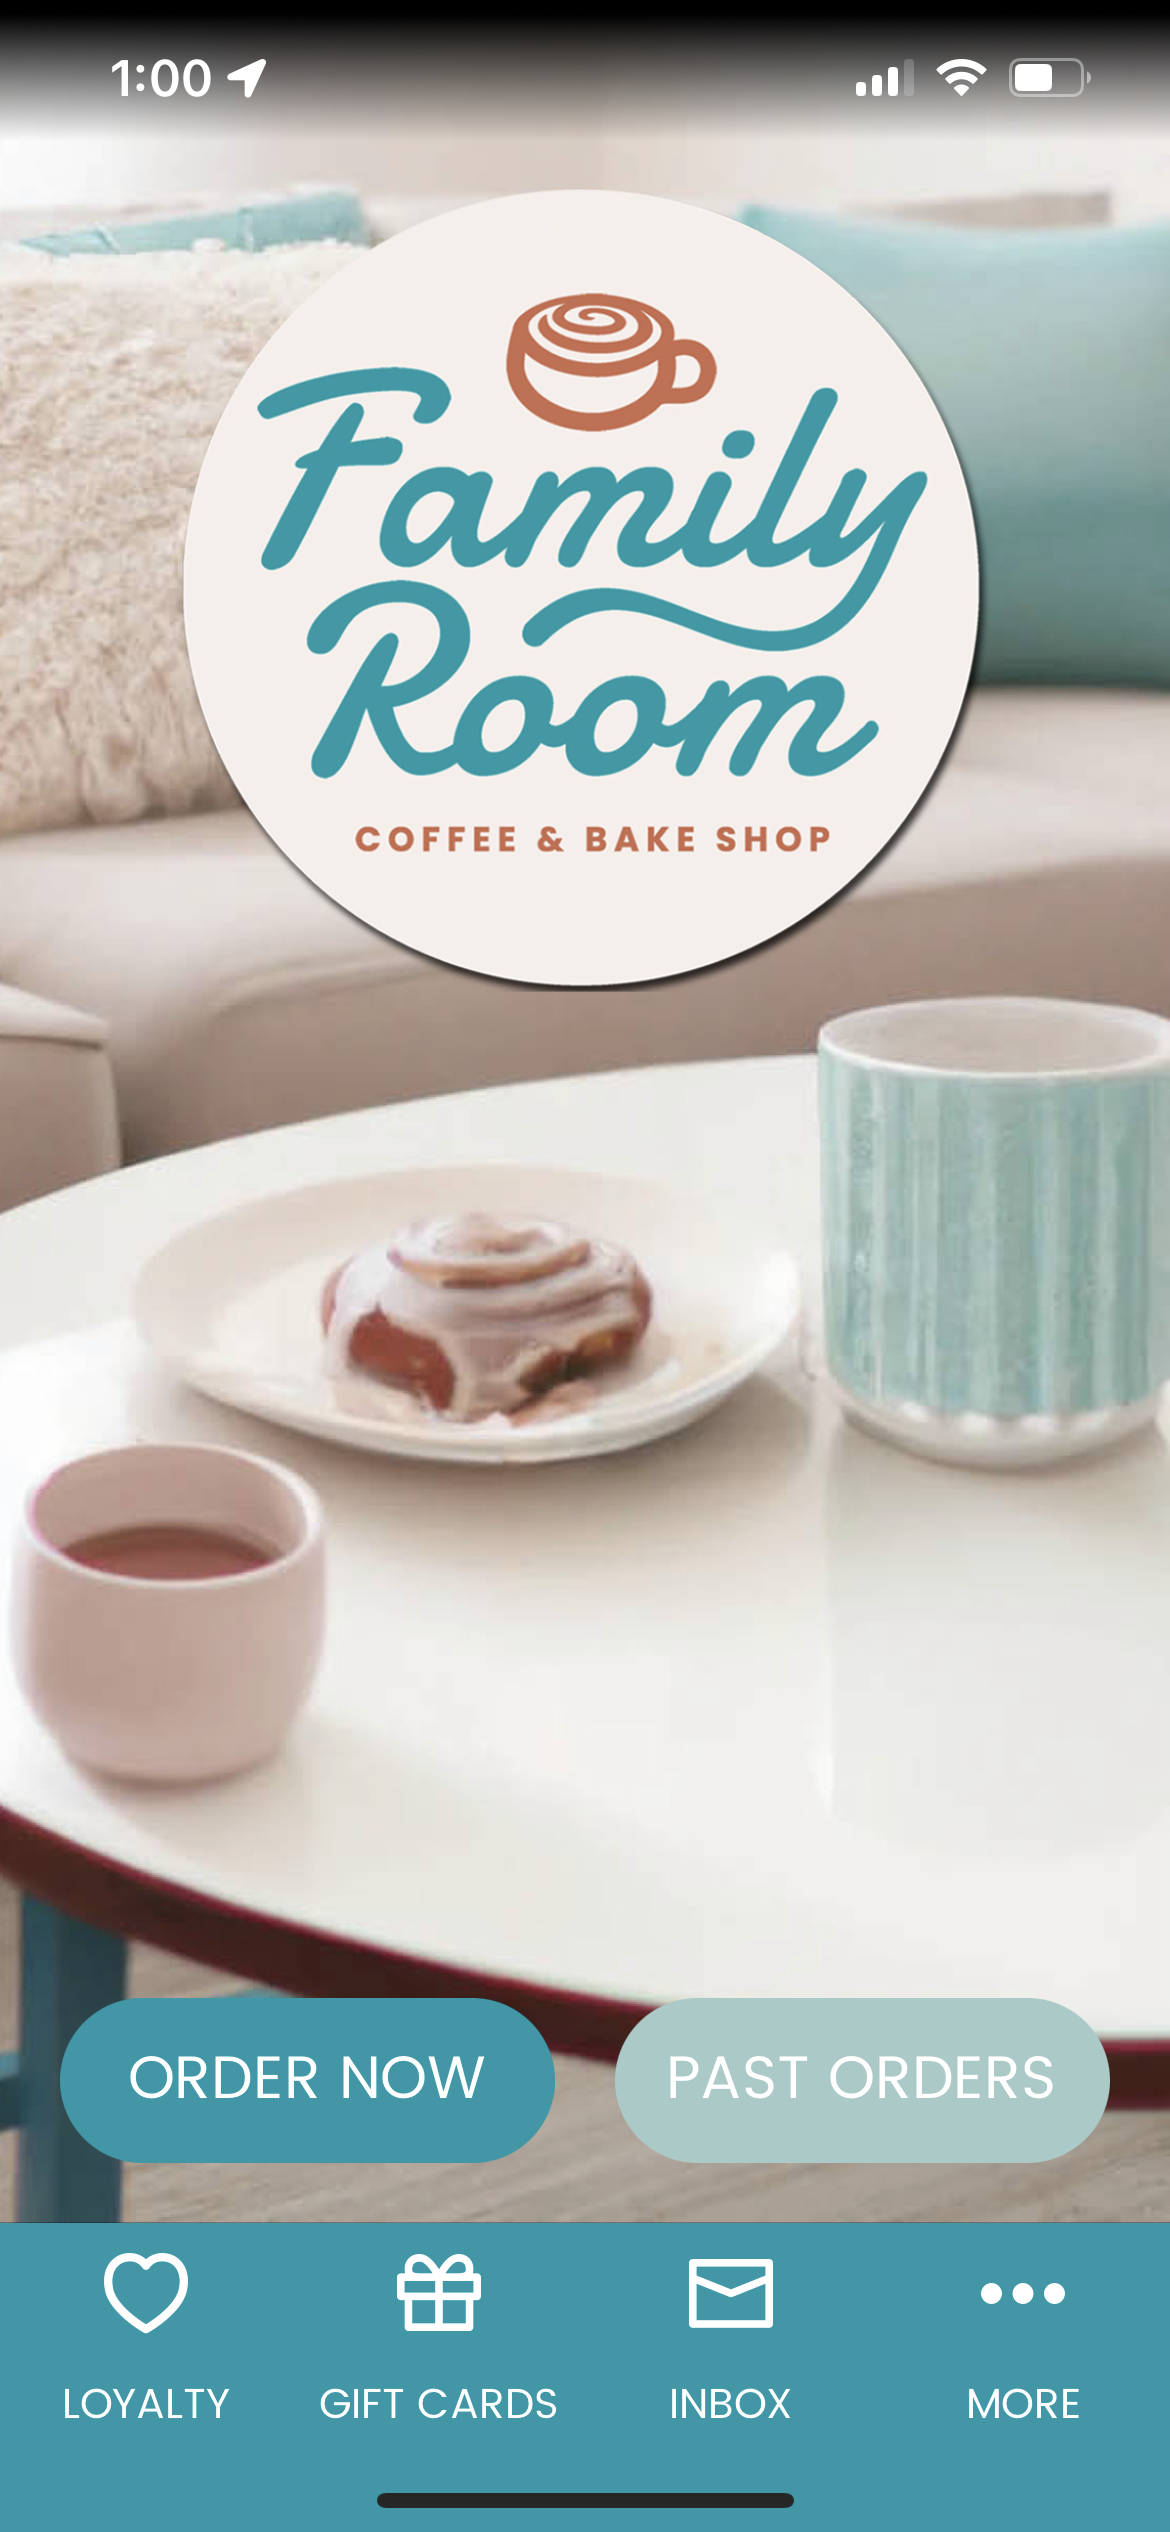 Family Room Coffee & Bake Shop App Download